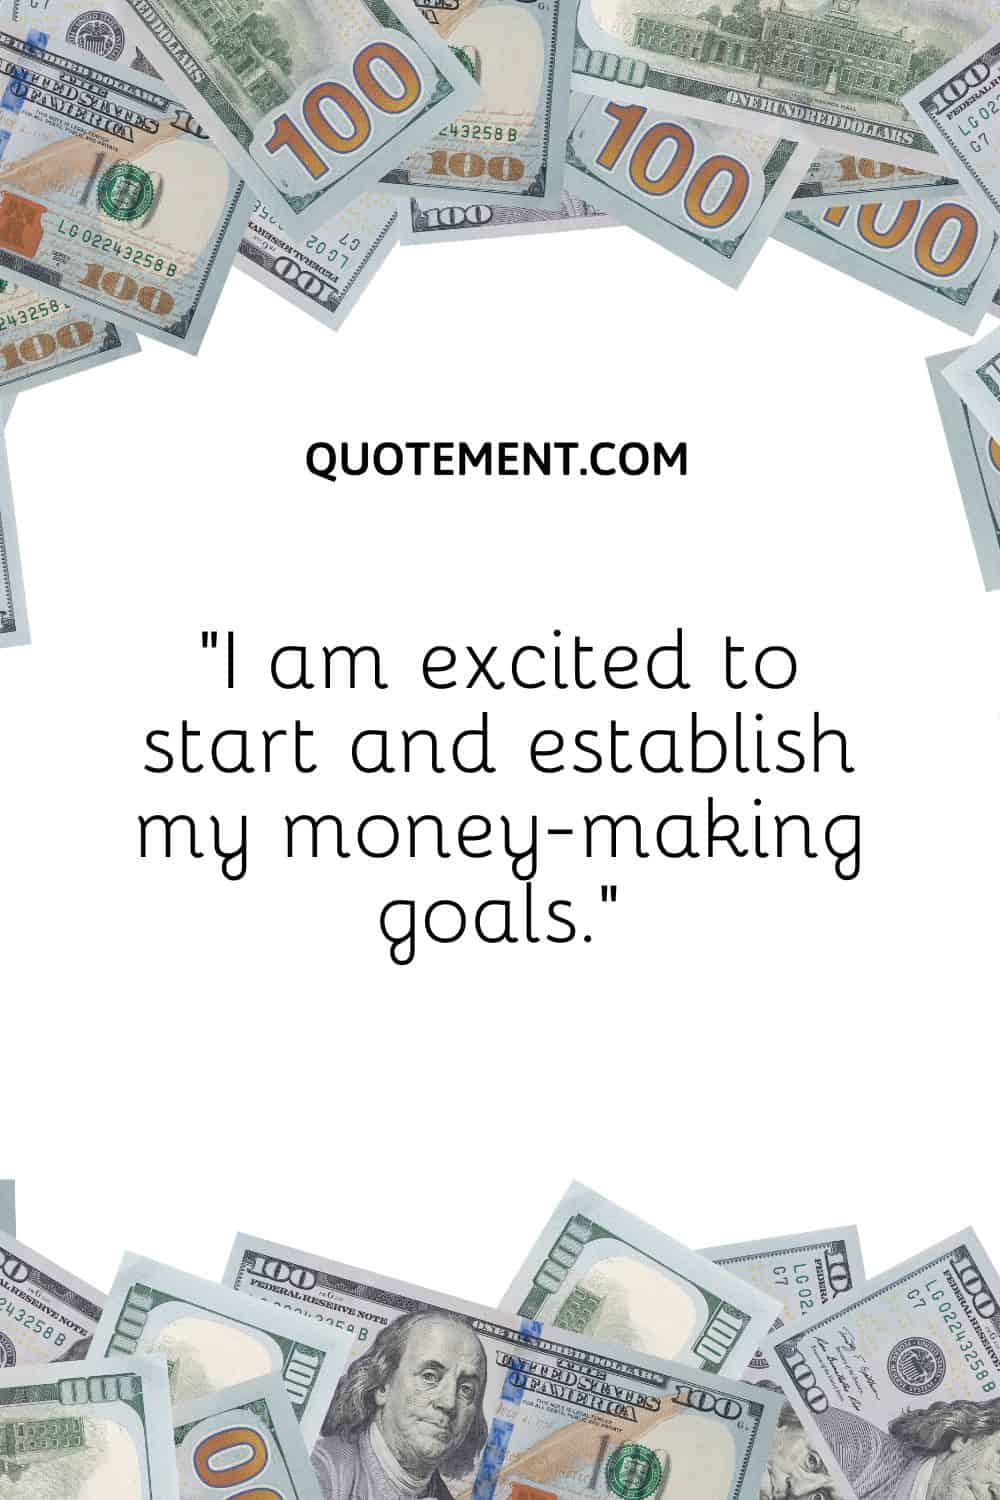 “I am excited to start and establish my money-making goals.”